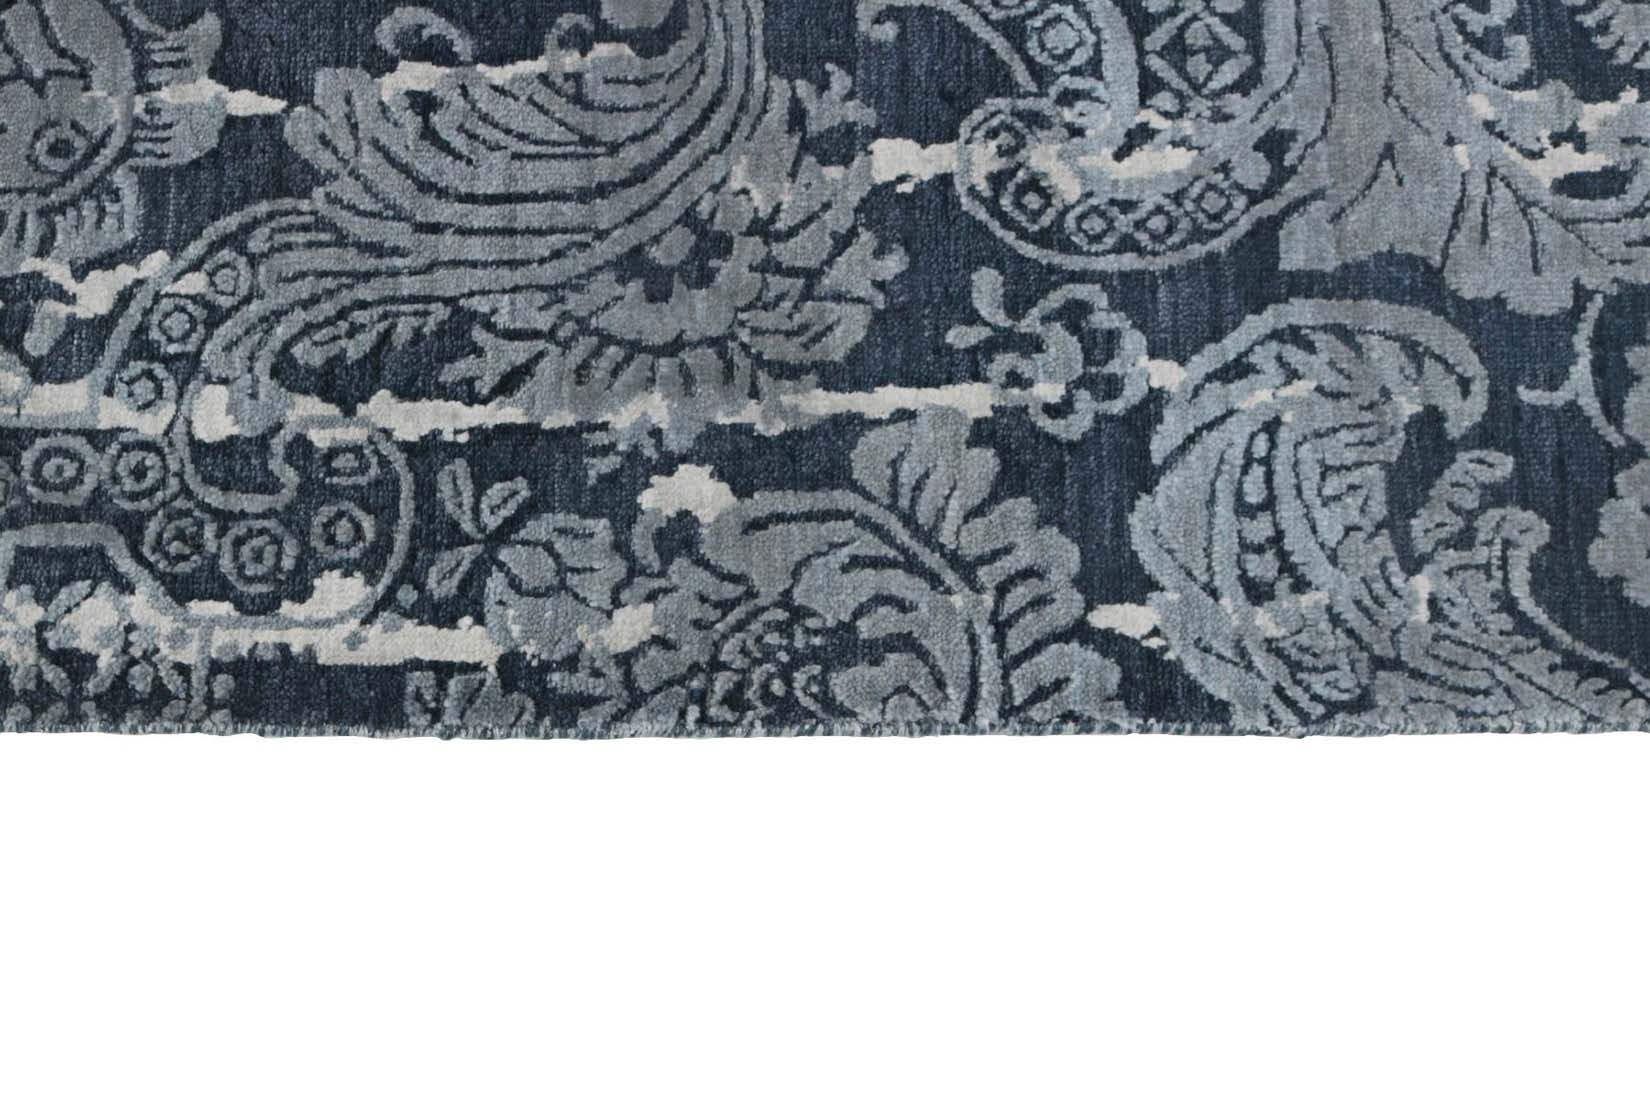 Authentic oriental rug with a damask pattern in blue and grey